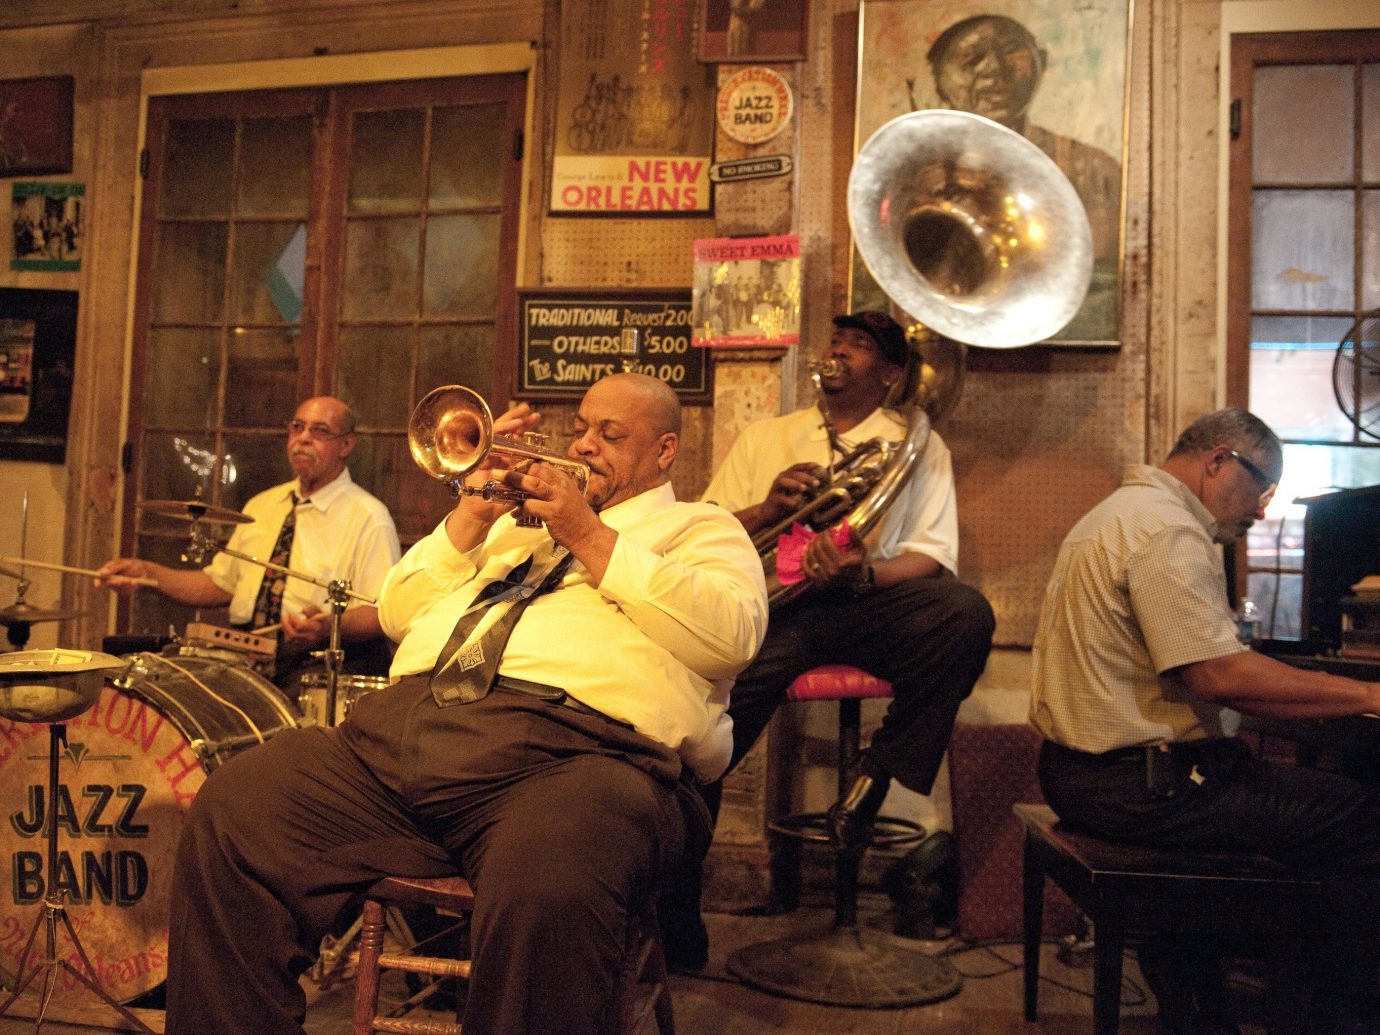 Big band playing in New Orleans Louisiana